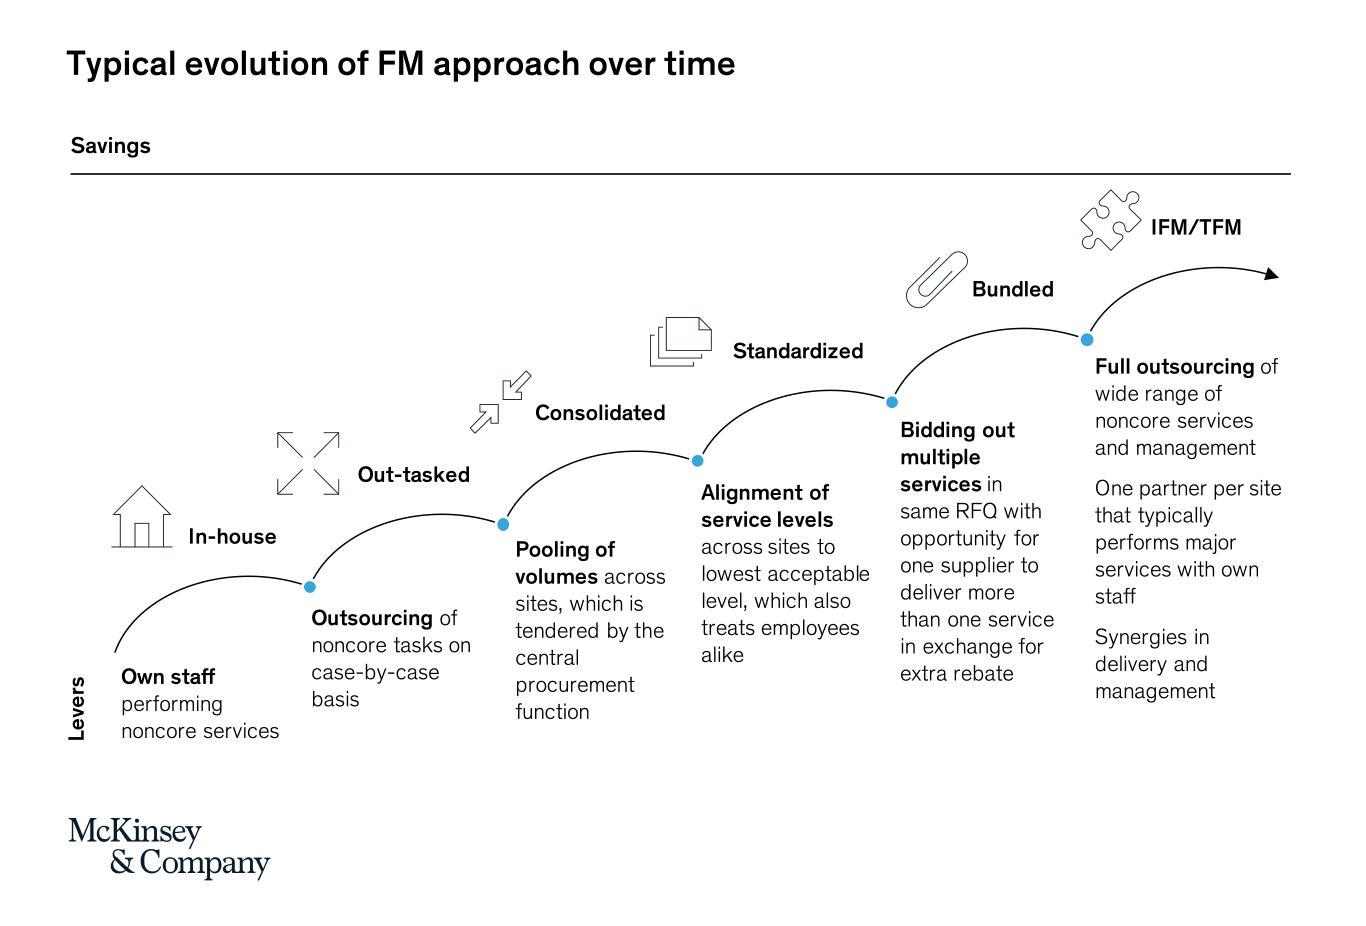 Typical Evolution of FM Approach Over Time